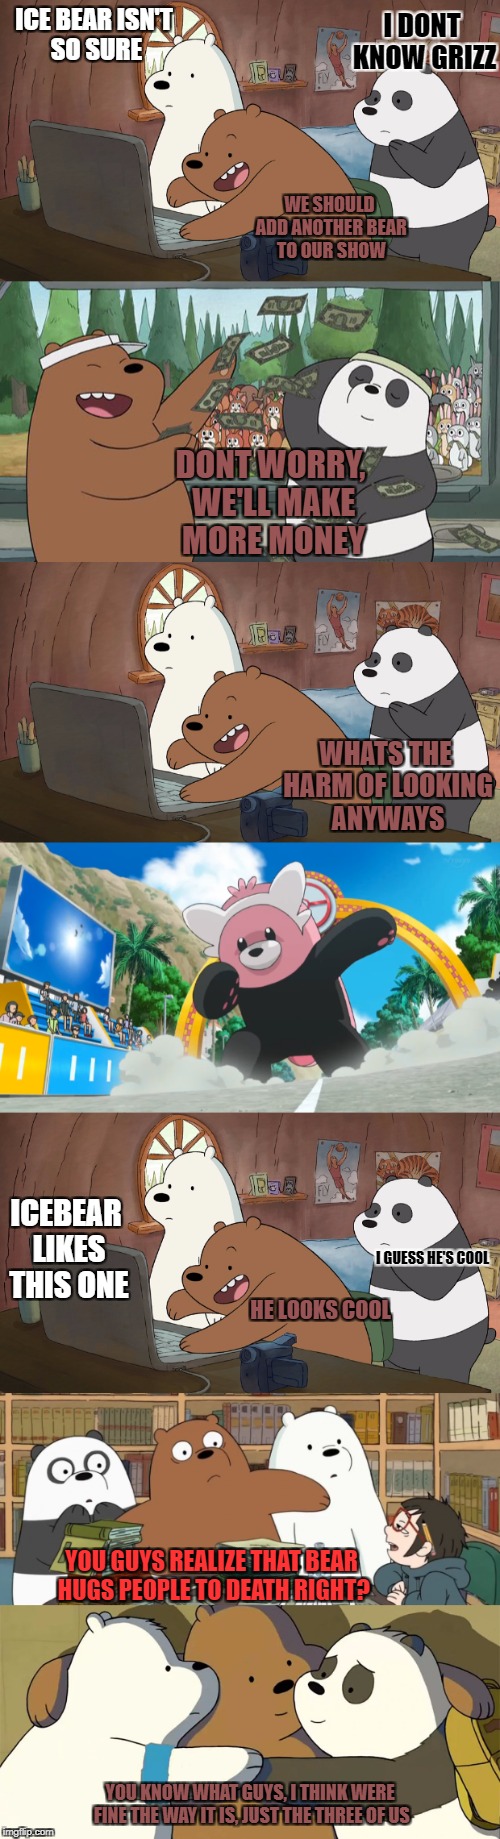 before bewear was in pokemon he was  being scouted  | I DONT KNOW GRIZZ; ICE BEAR ISN'T SO SURE; WE SHOULD ADD ANOTHER BEAR TO OUR SHOW; DONT WORRY, WE'LL MAKE MORE MONEY; WHATS THE HARM OF LOOKING ANYWAYS; ICEBEAR LIKES THIS ONE; I GUESS HE'S COOL; HE LOOKS COOL; YOU GUYS REALIZE THAT BEAR HUGS PEOPLE TO DEATH RIGHT? YOU KNOW WHAT GUYS, I THINK WERE FINE THE WAY IT IS, JUST THE THREE OF US | image tagged in webarebears,bewear | made w/ Imgflip meme maker